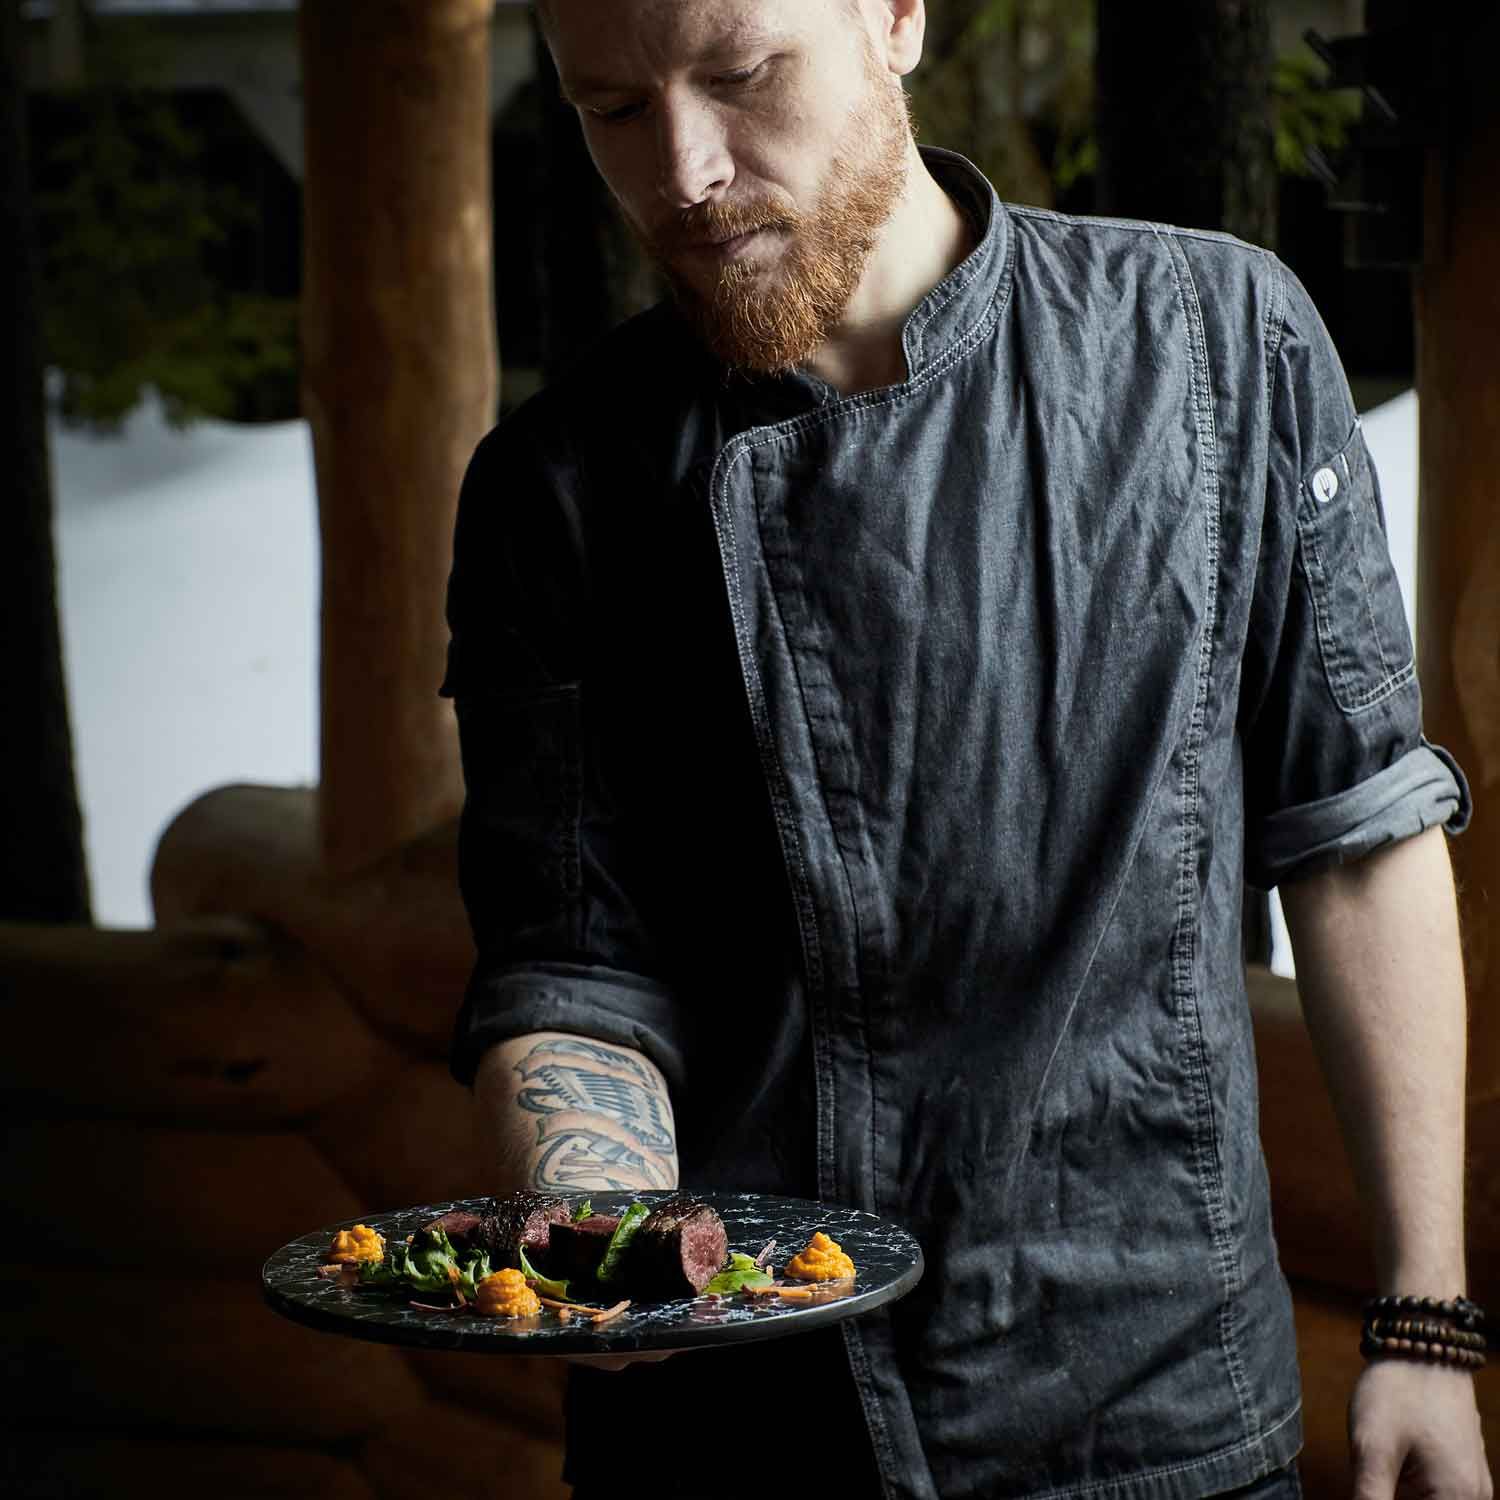 A private chef with a beard is holding a plate of food